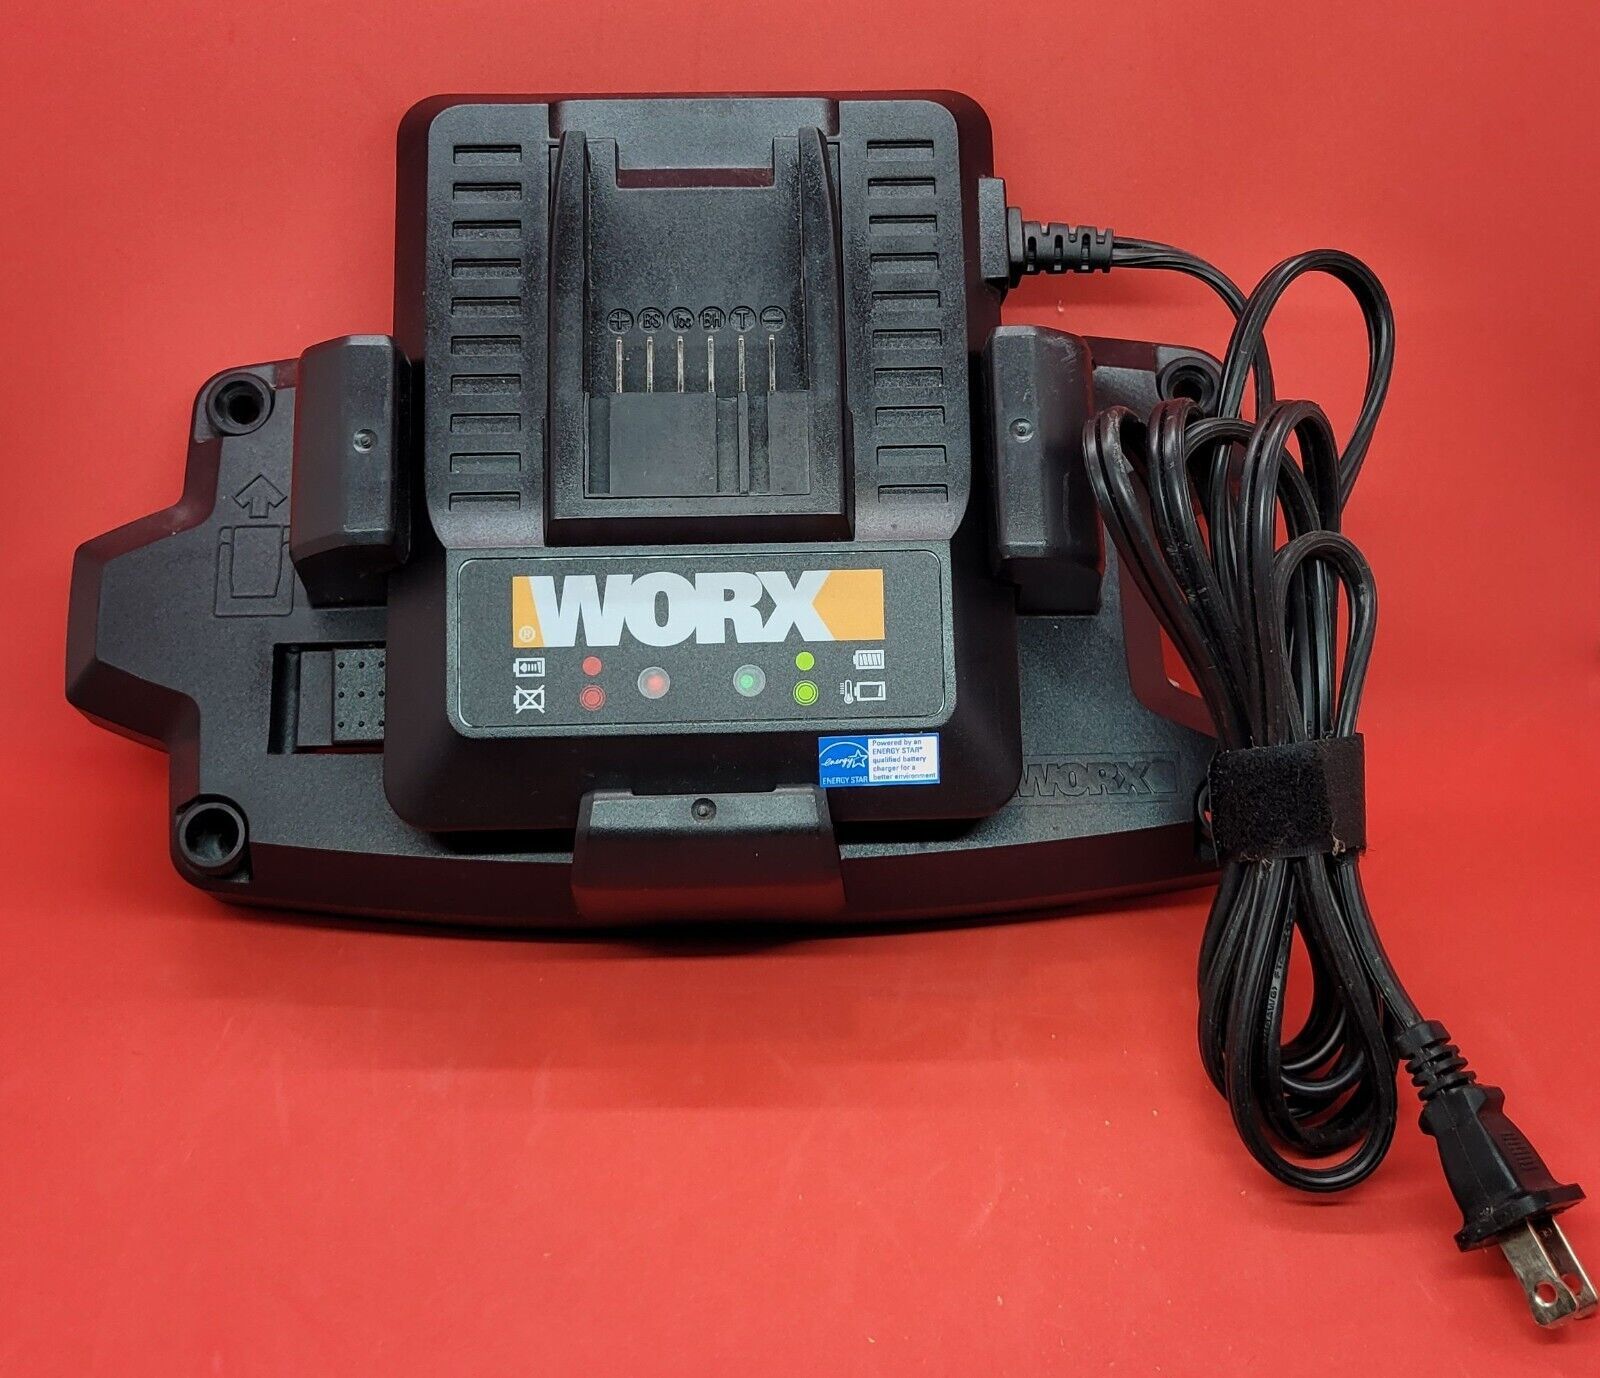 WORX WA3840 14.4V - 18V 0.5A Lithium Ion Battery Charger with Wall Mount - $10.09